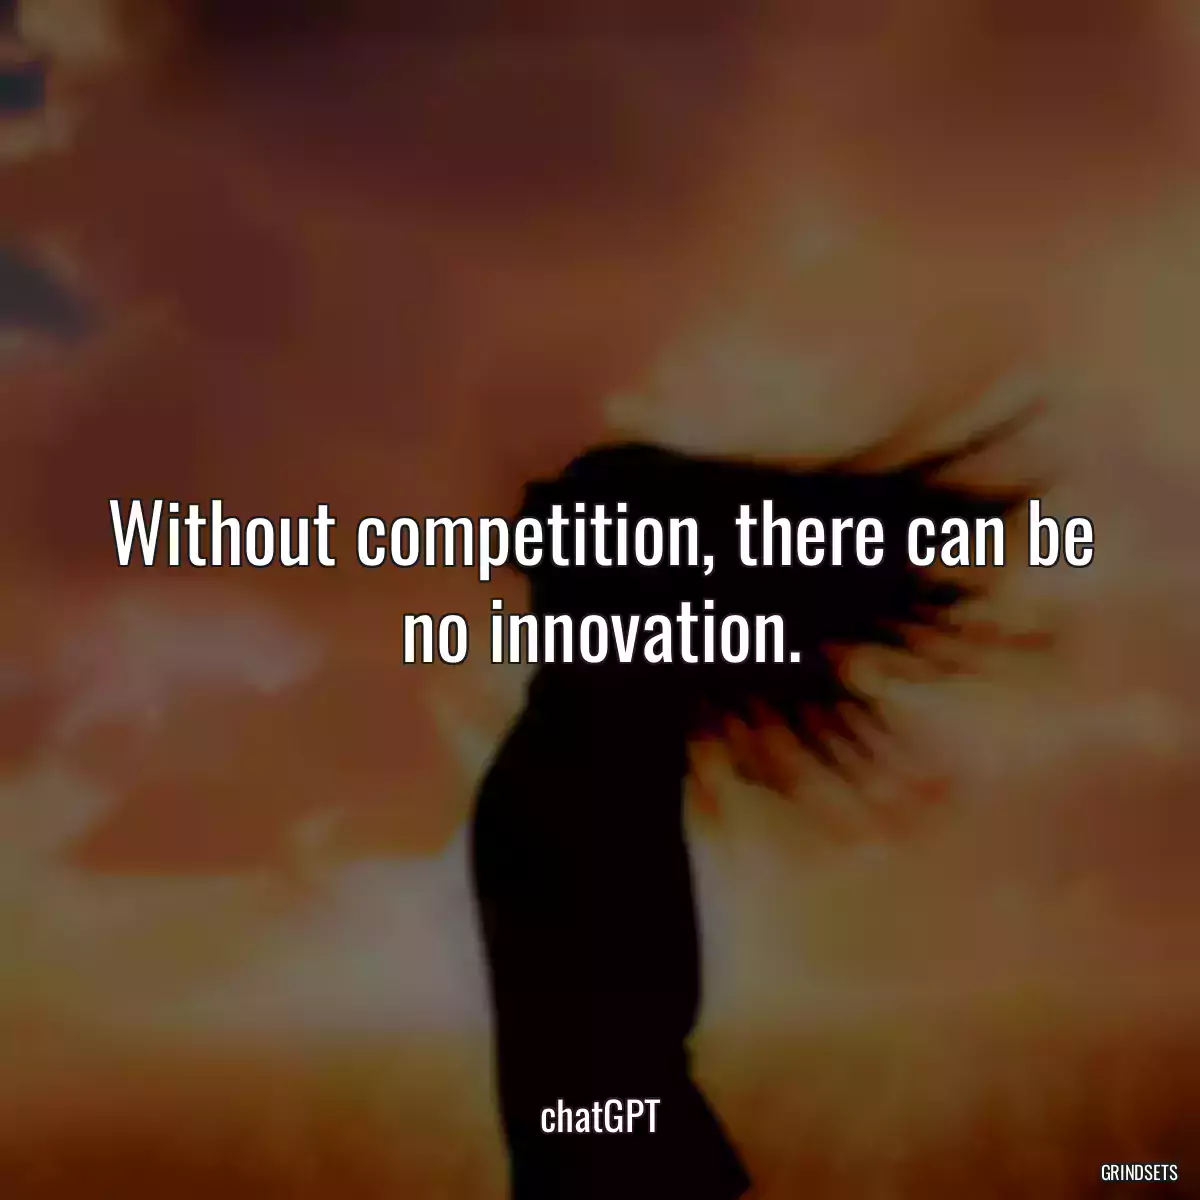 Without competition, there can be no innovation.